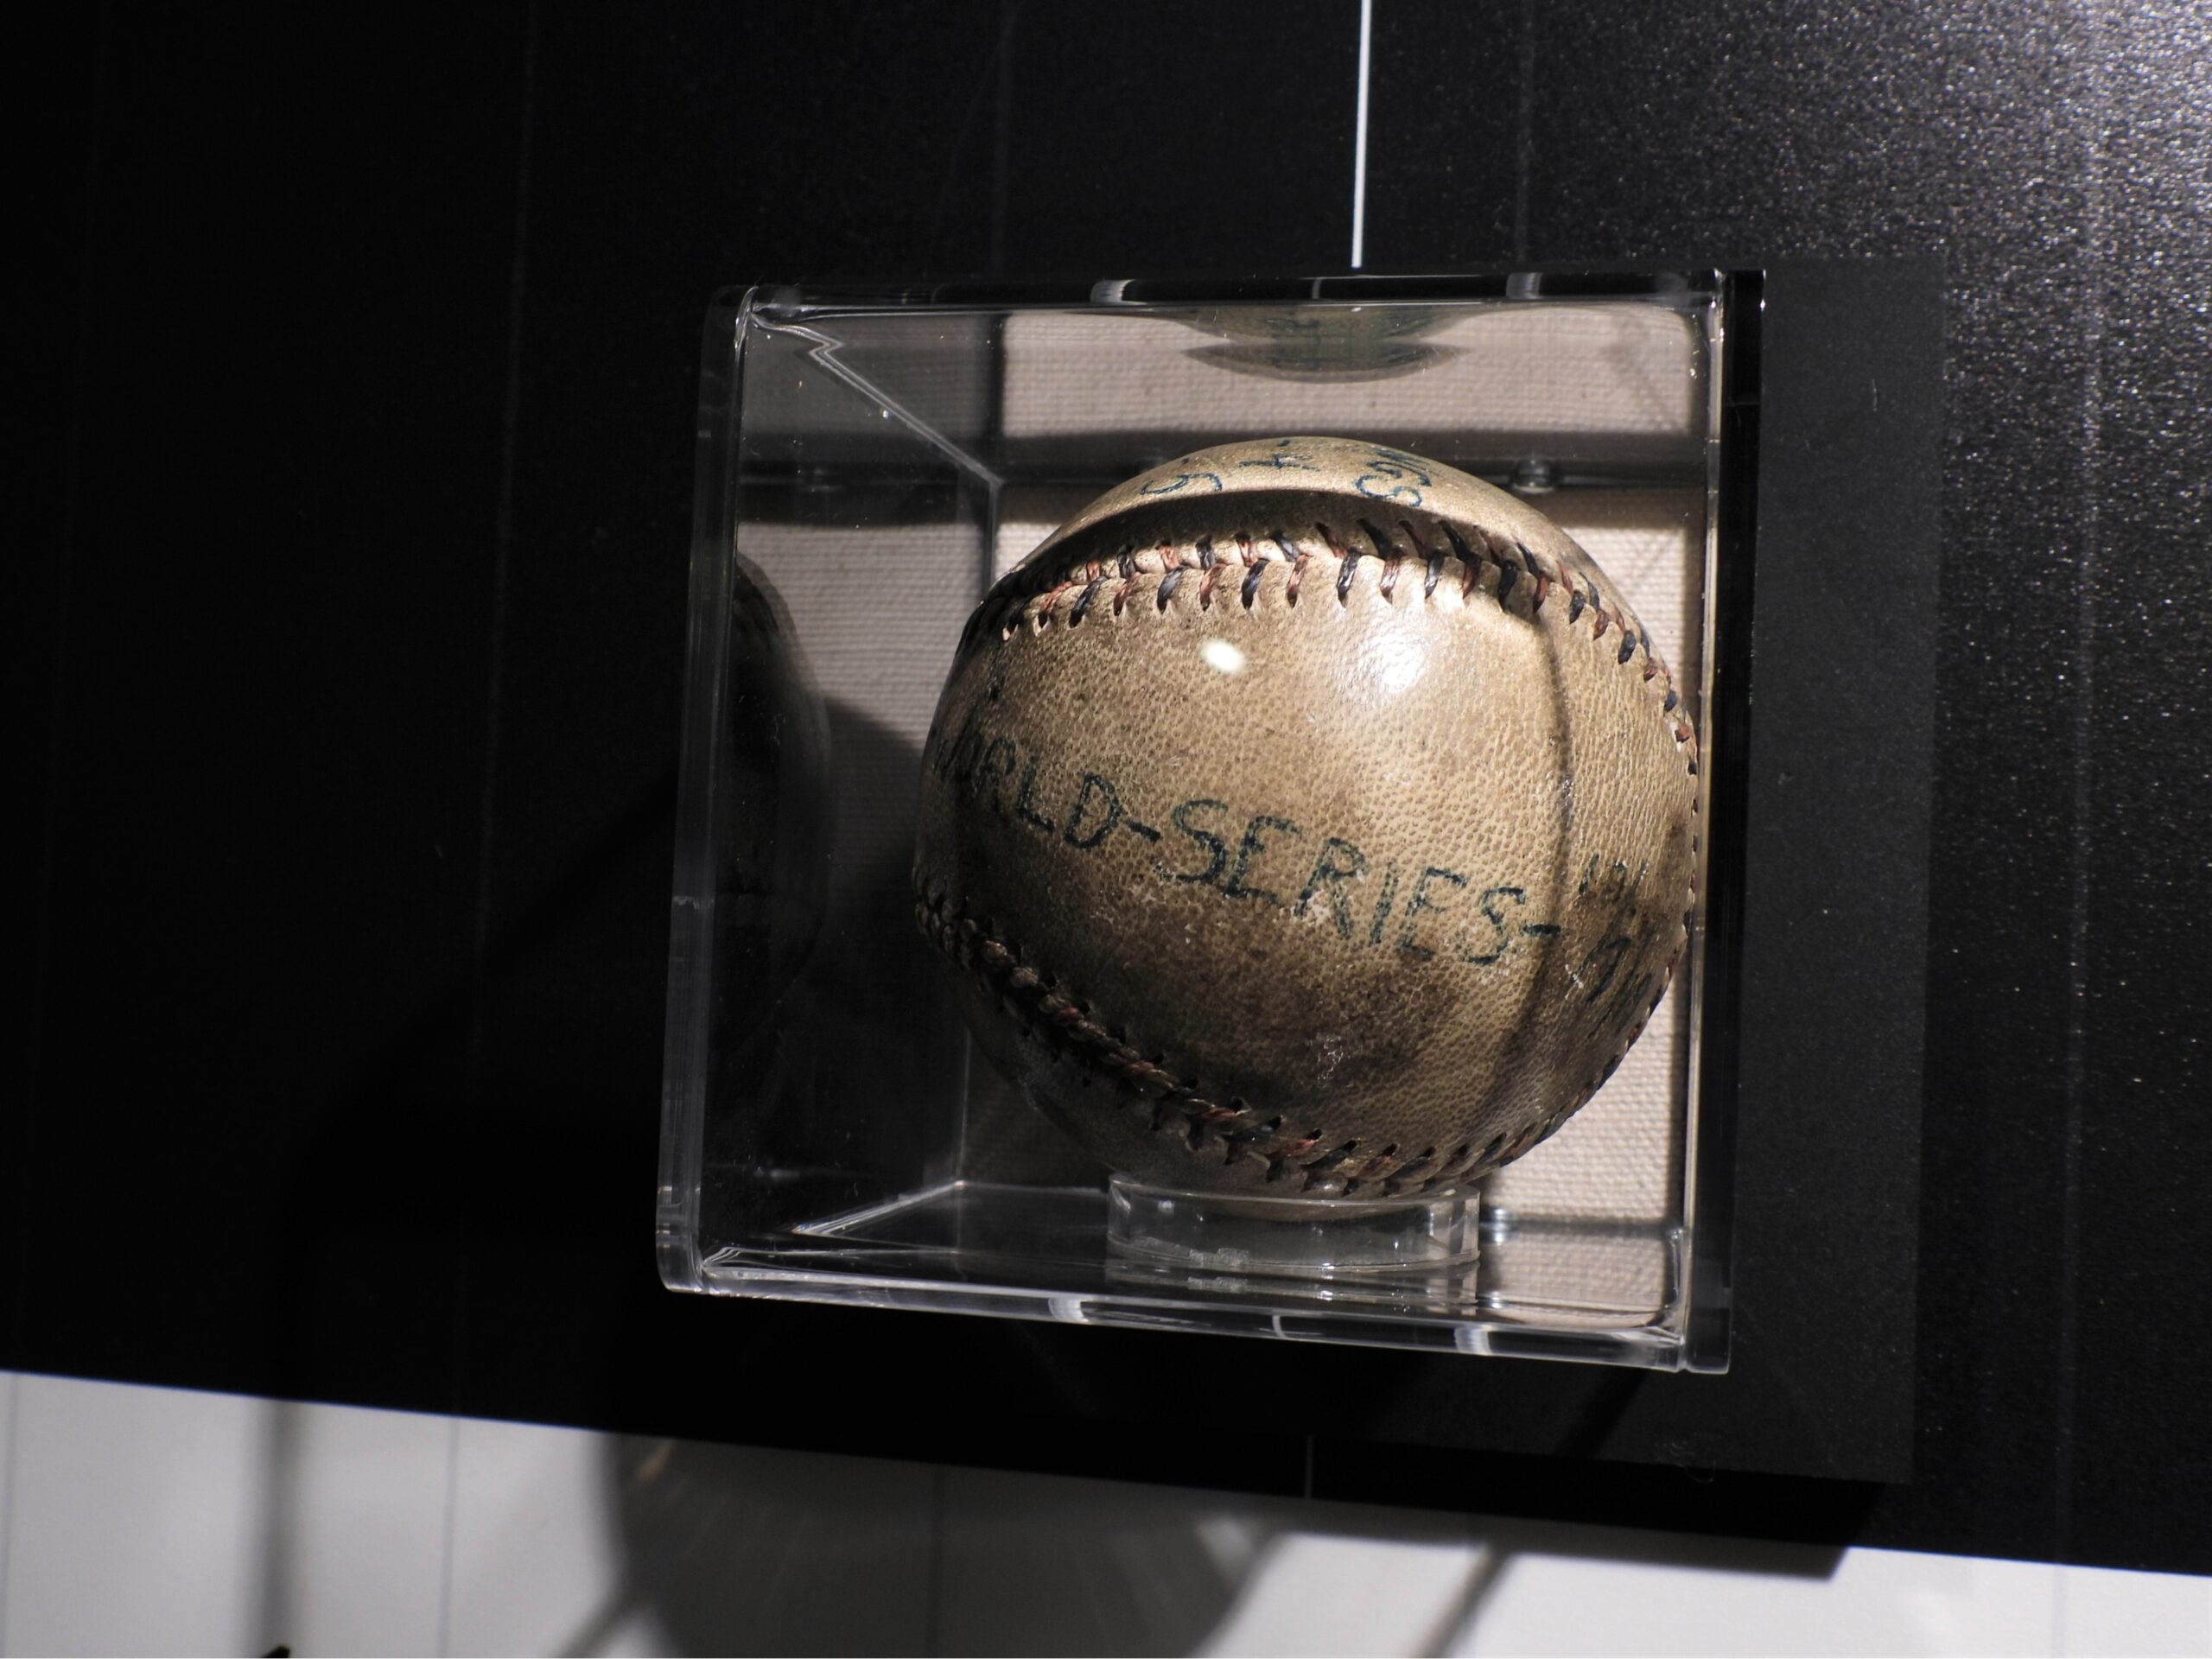 Baseball from the 1919 World Series